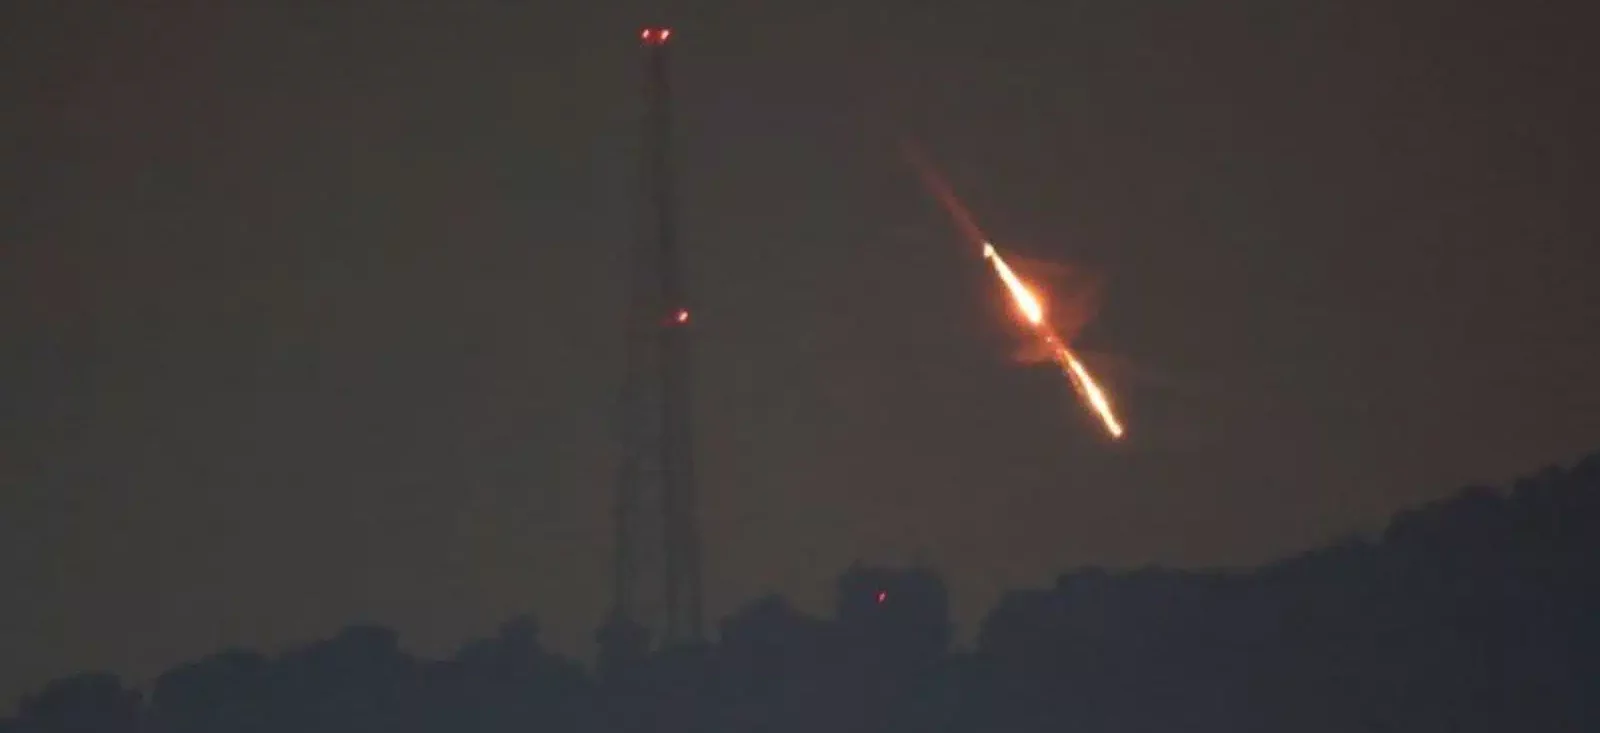 Israel launched missile attack on Iran